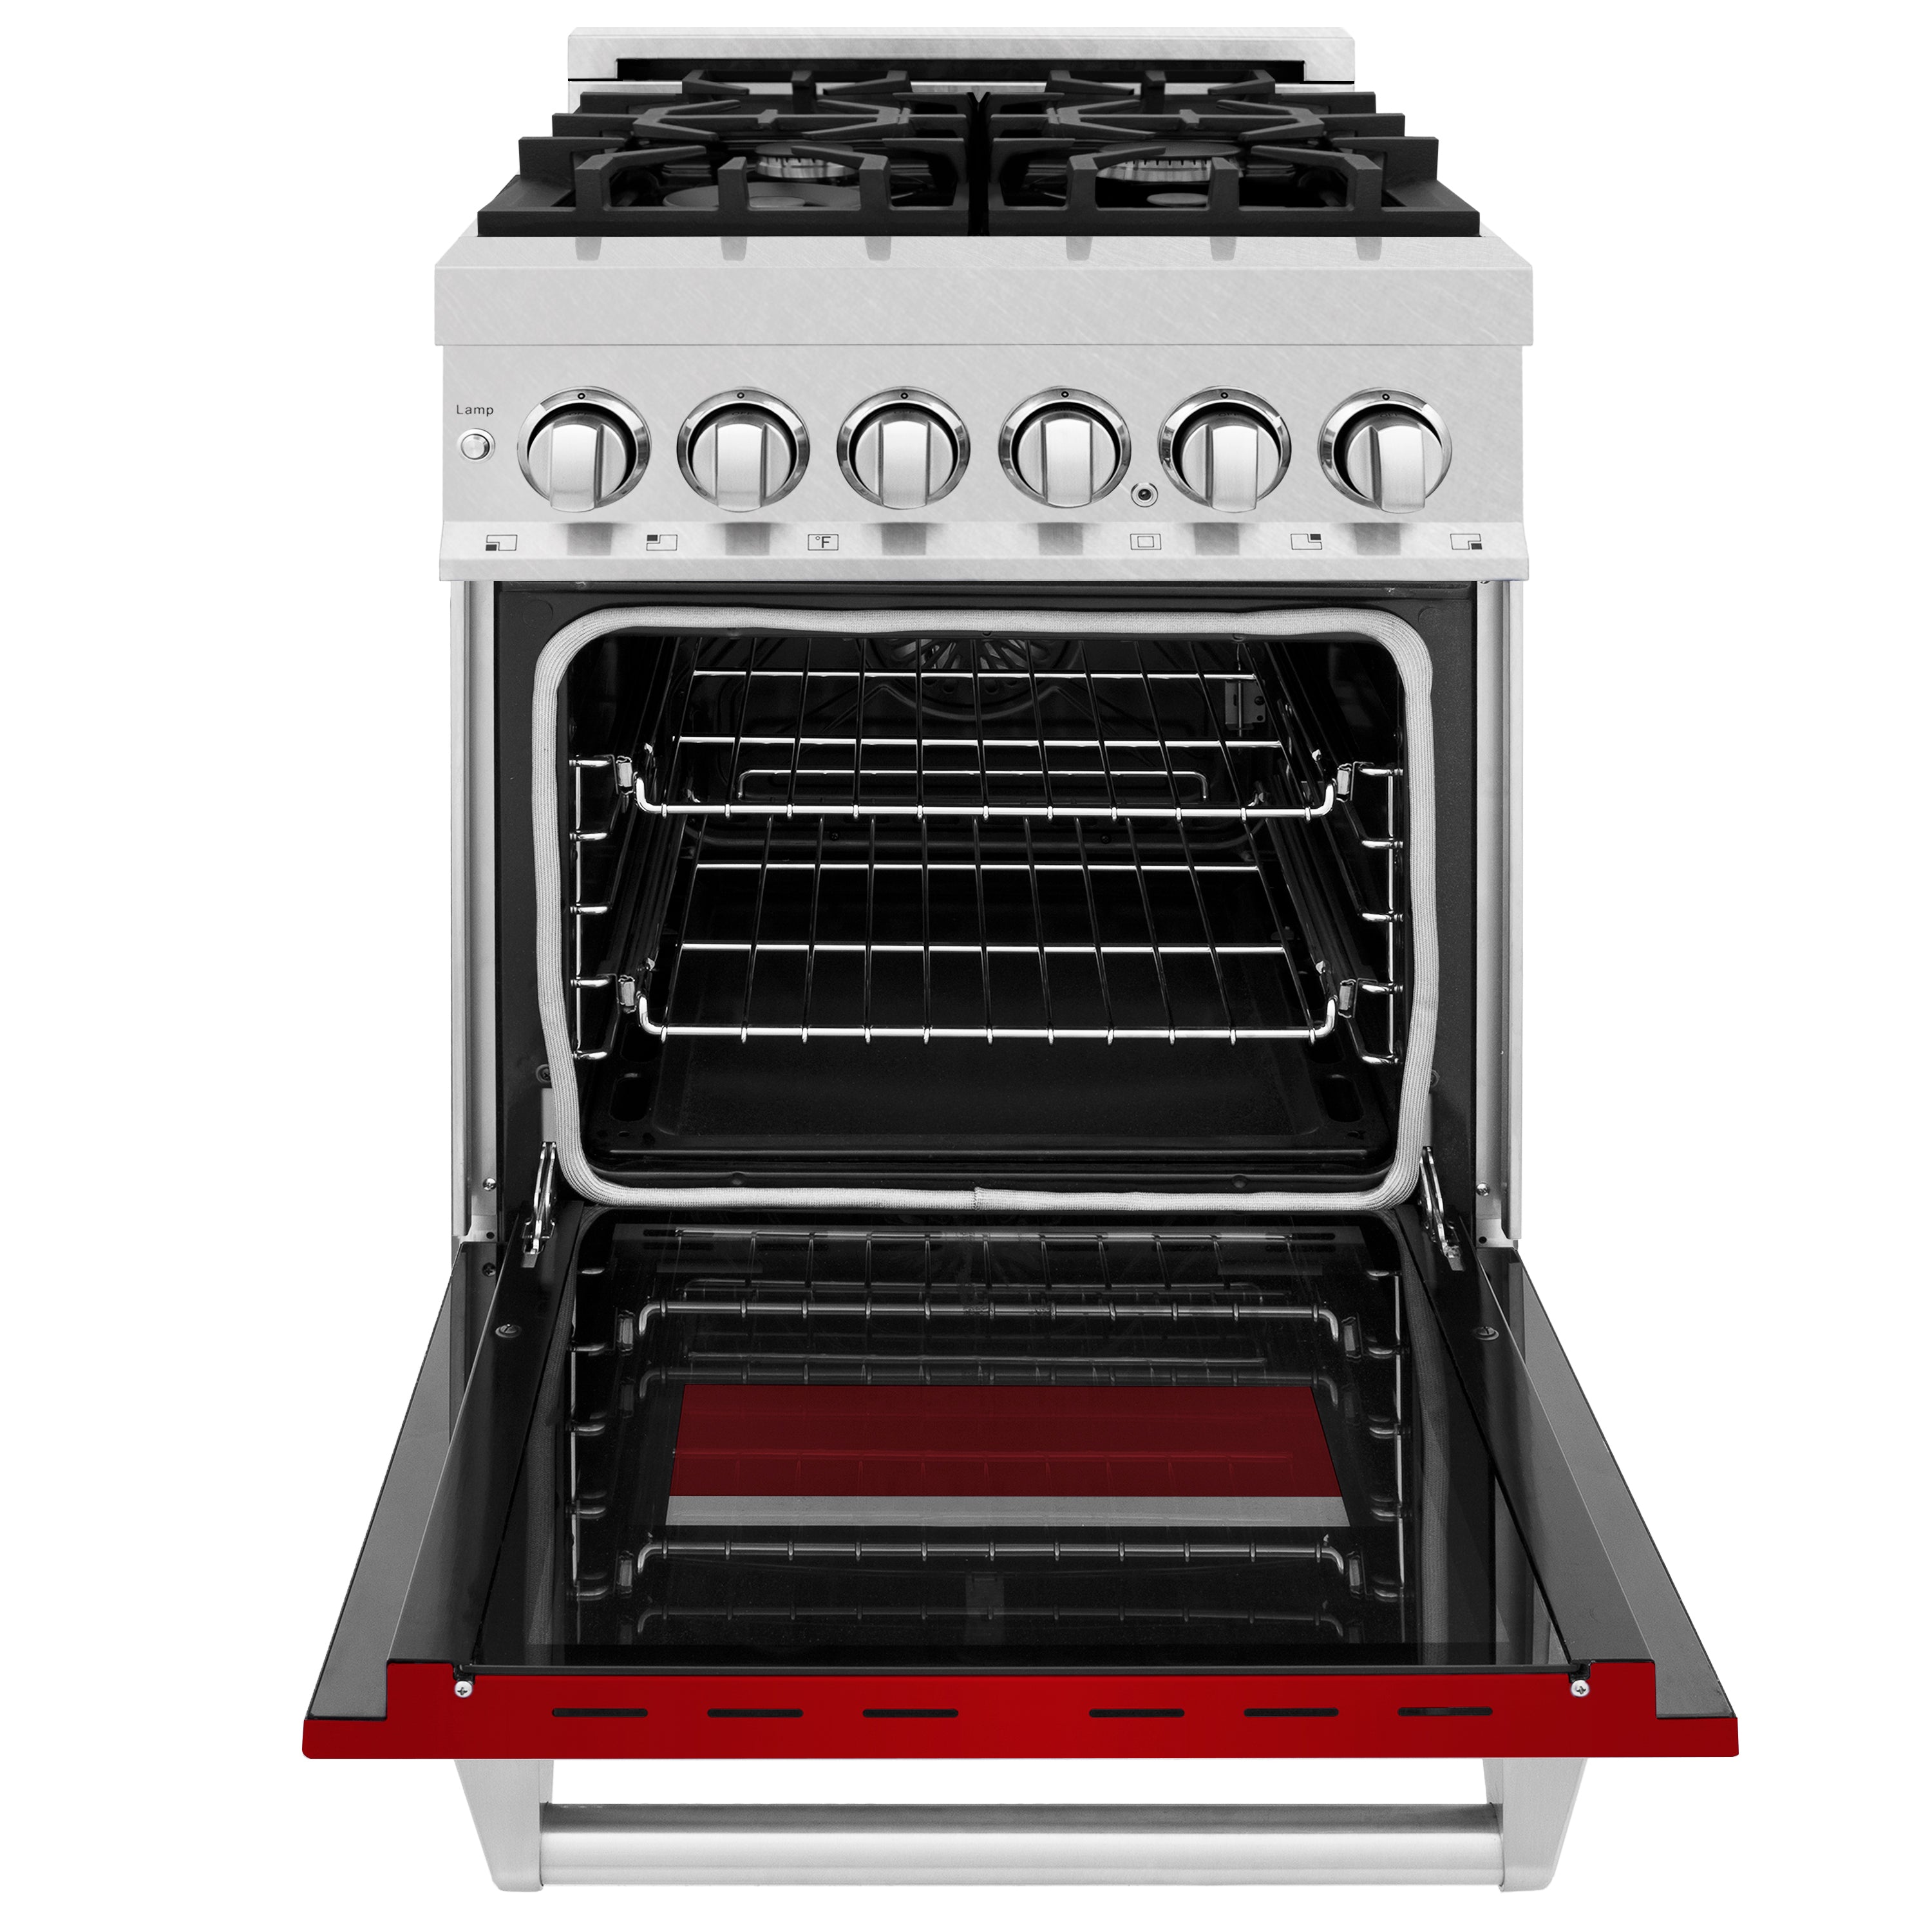 ZLINE 24" 2.8 cu. ft. Dual Fuel Range with Gas Stove and Electric Oven in Fingerprint Resistant Stainless Steel (RAS-24)